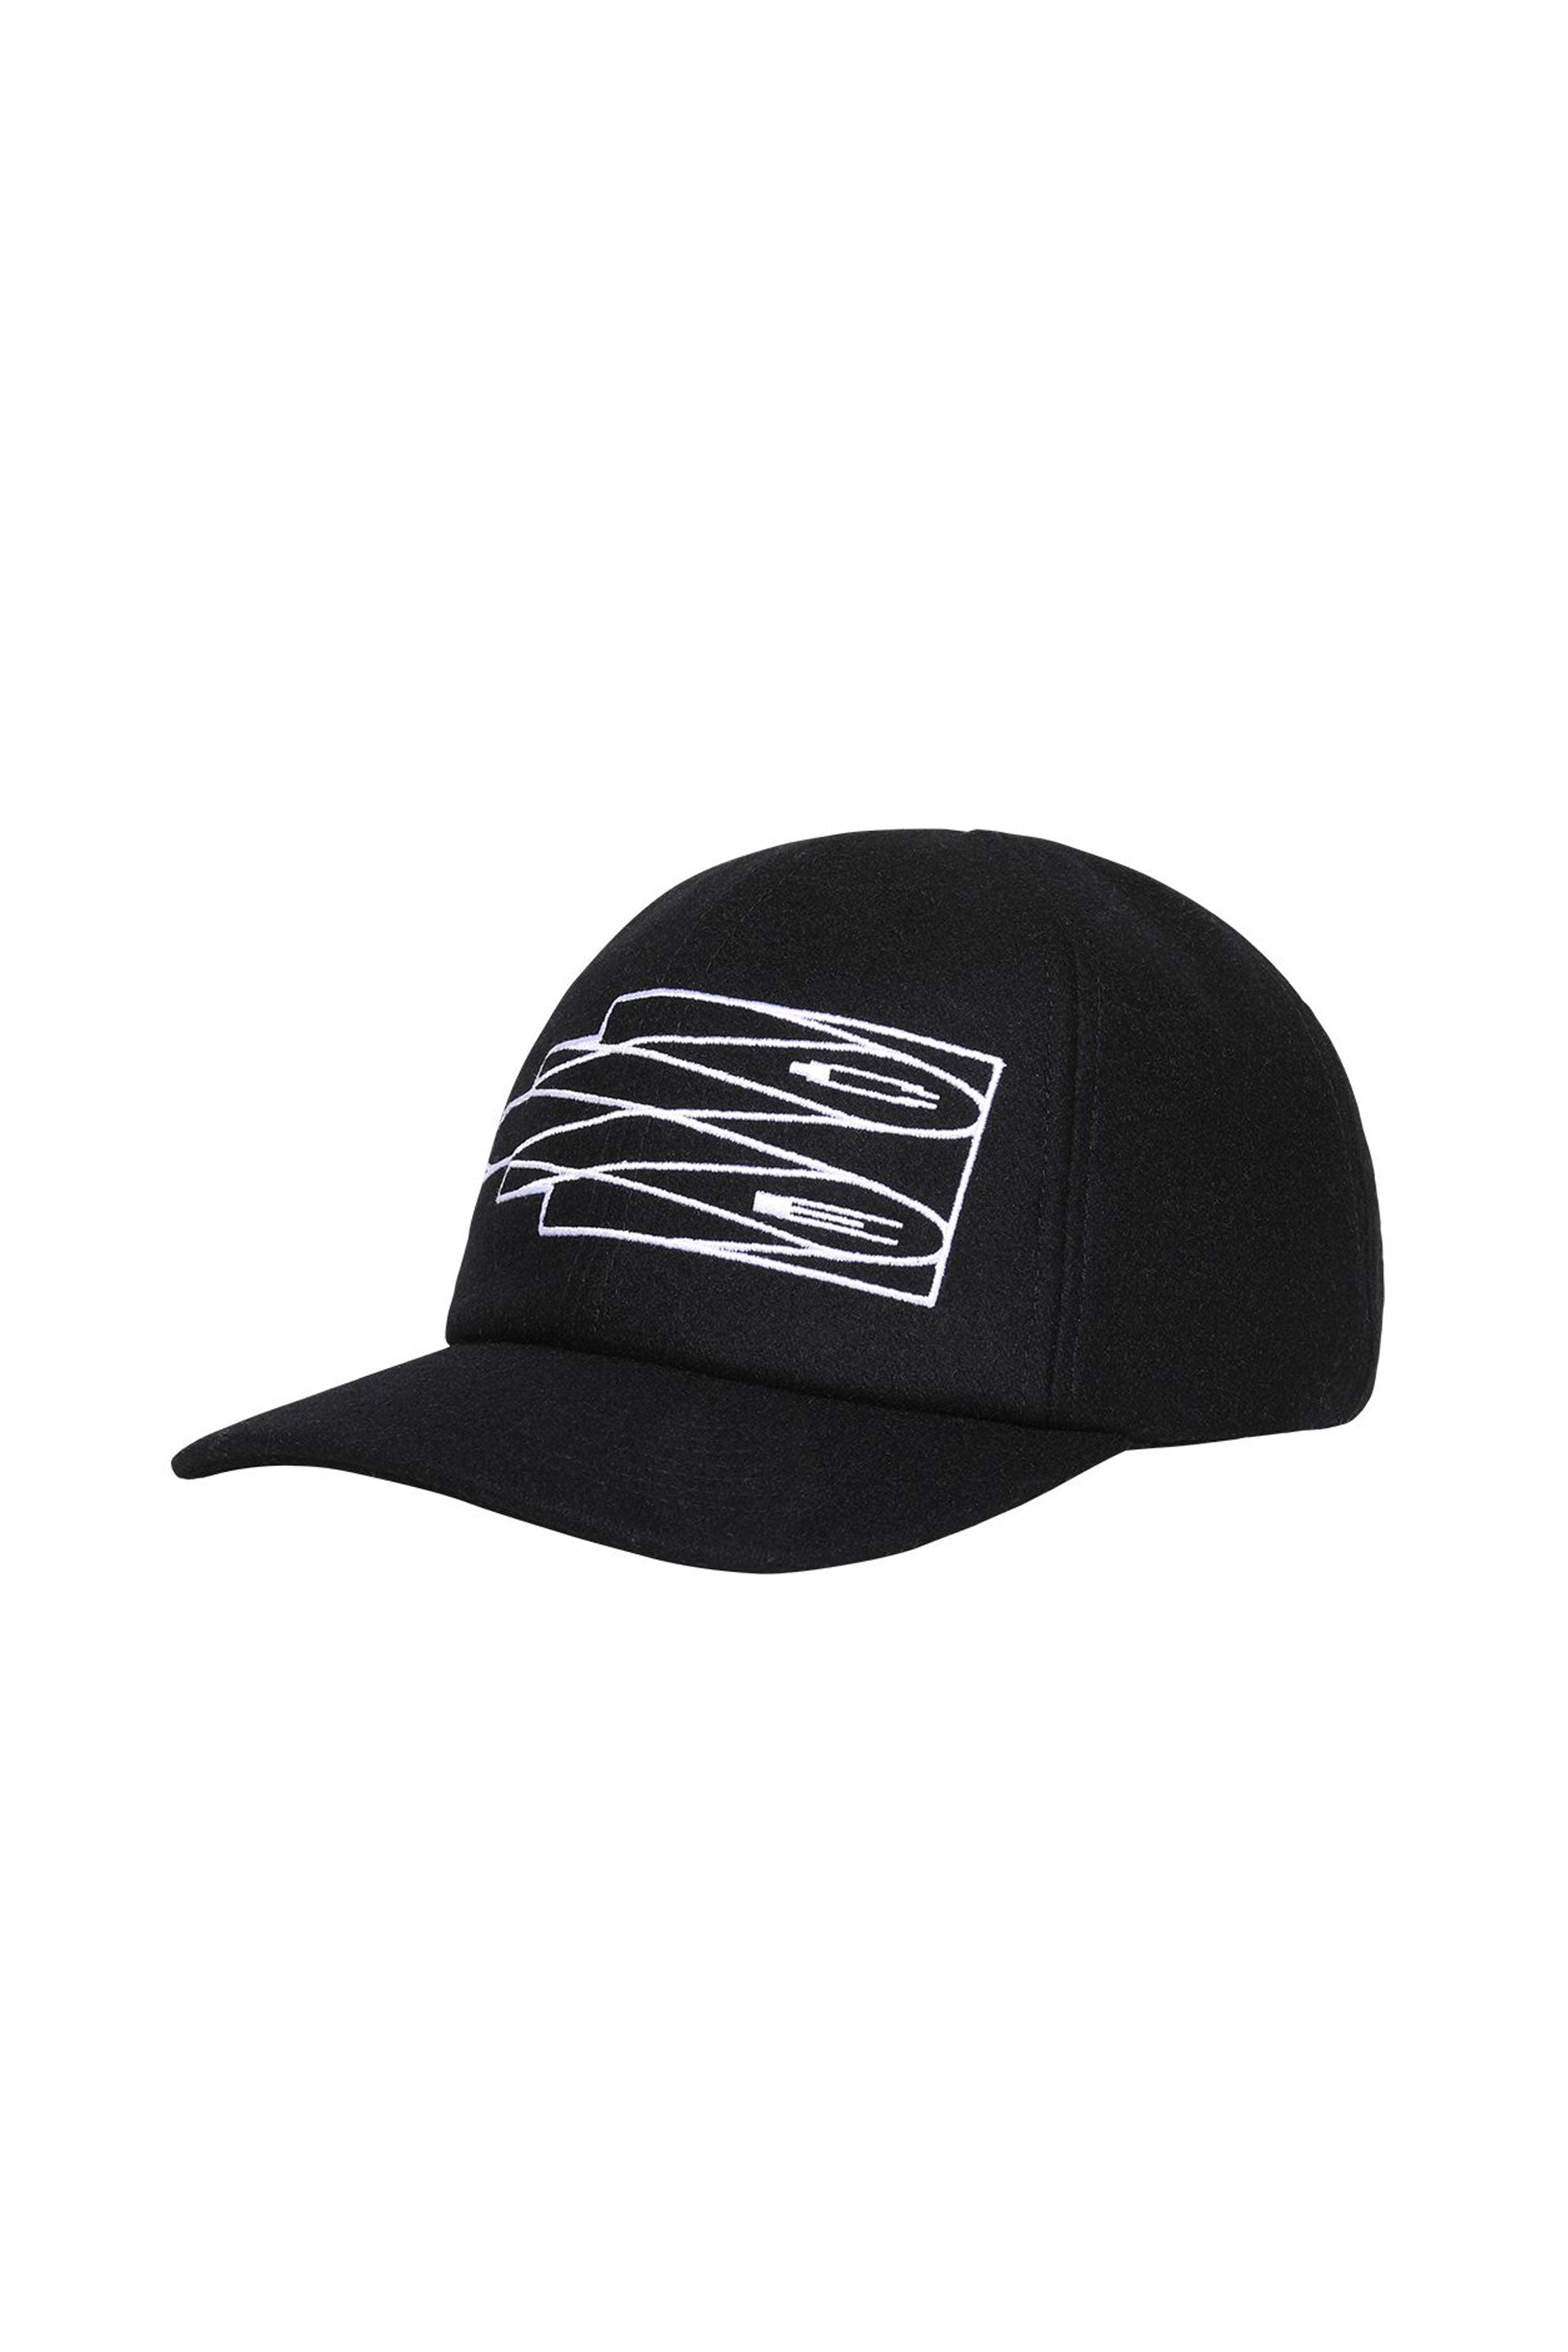 The CAV EMPT - ANGLE C E CAP BLACK available online with global shipping, and in PAM Stores Melbourne and Sydney.